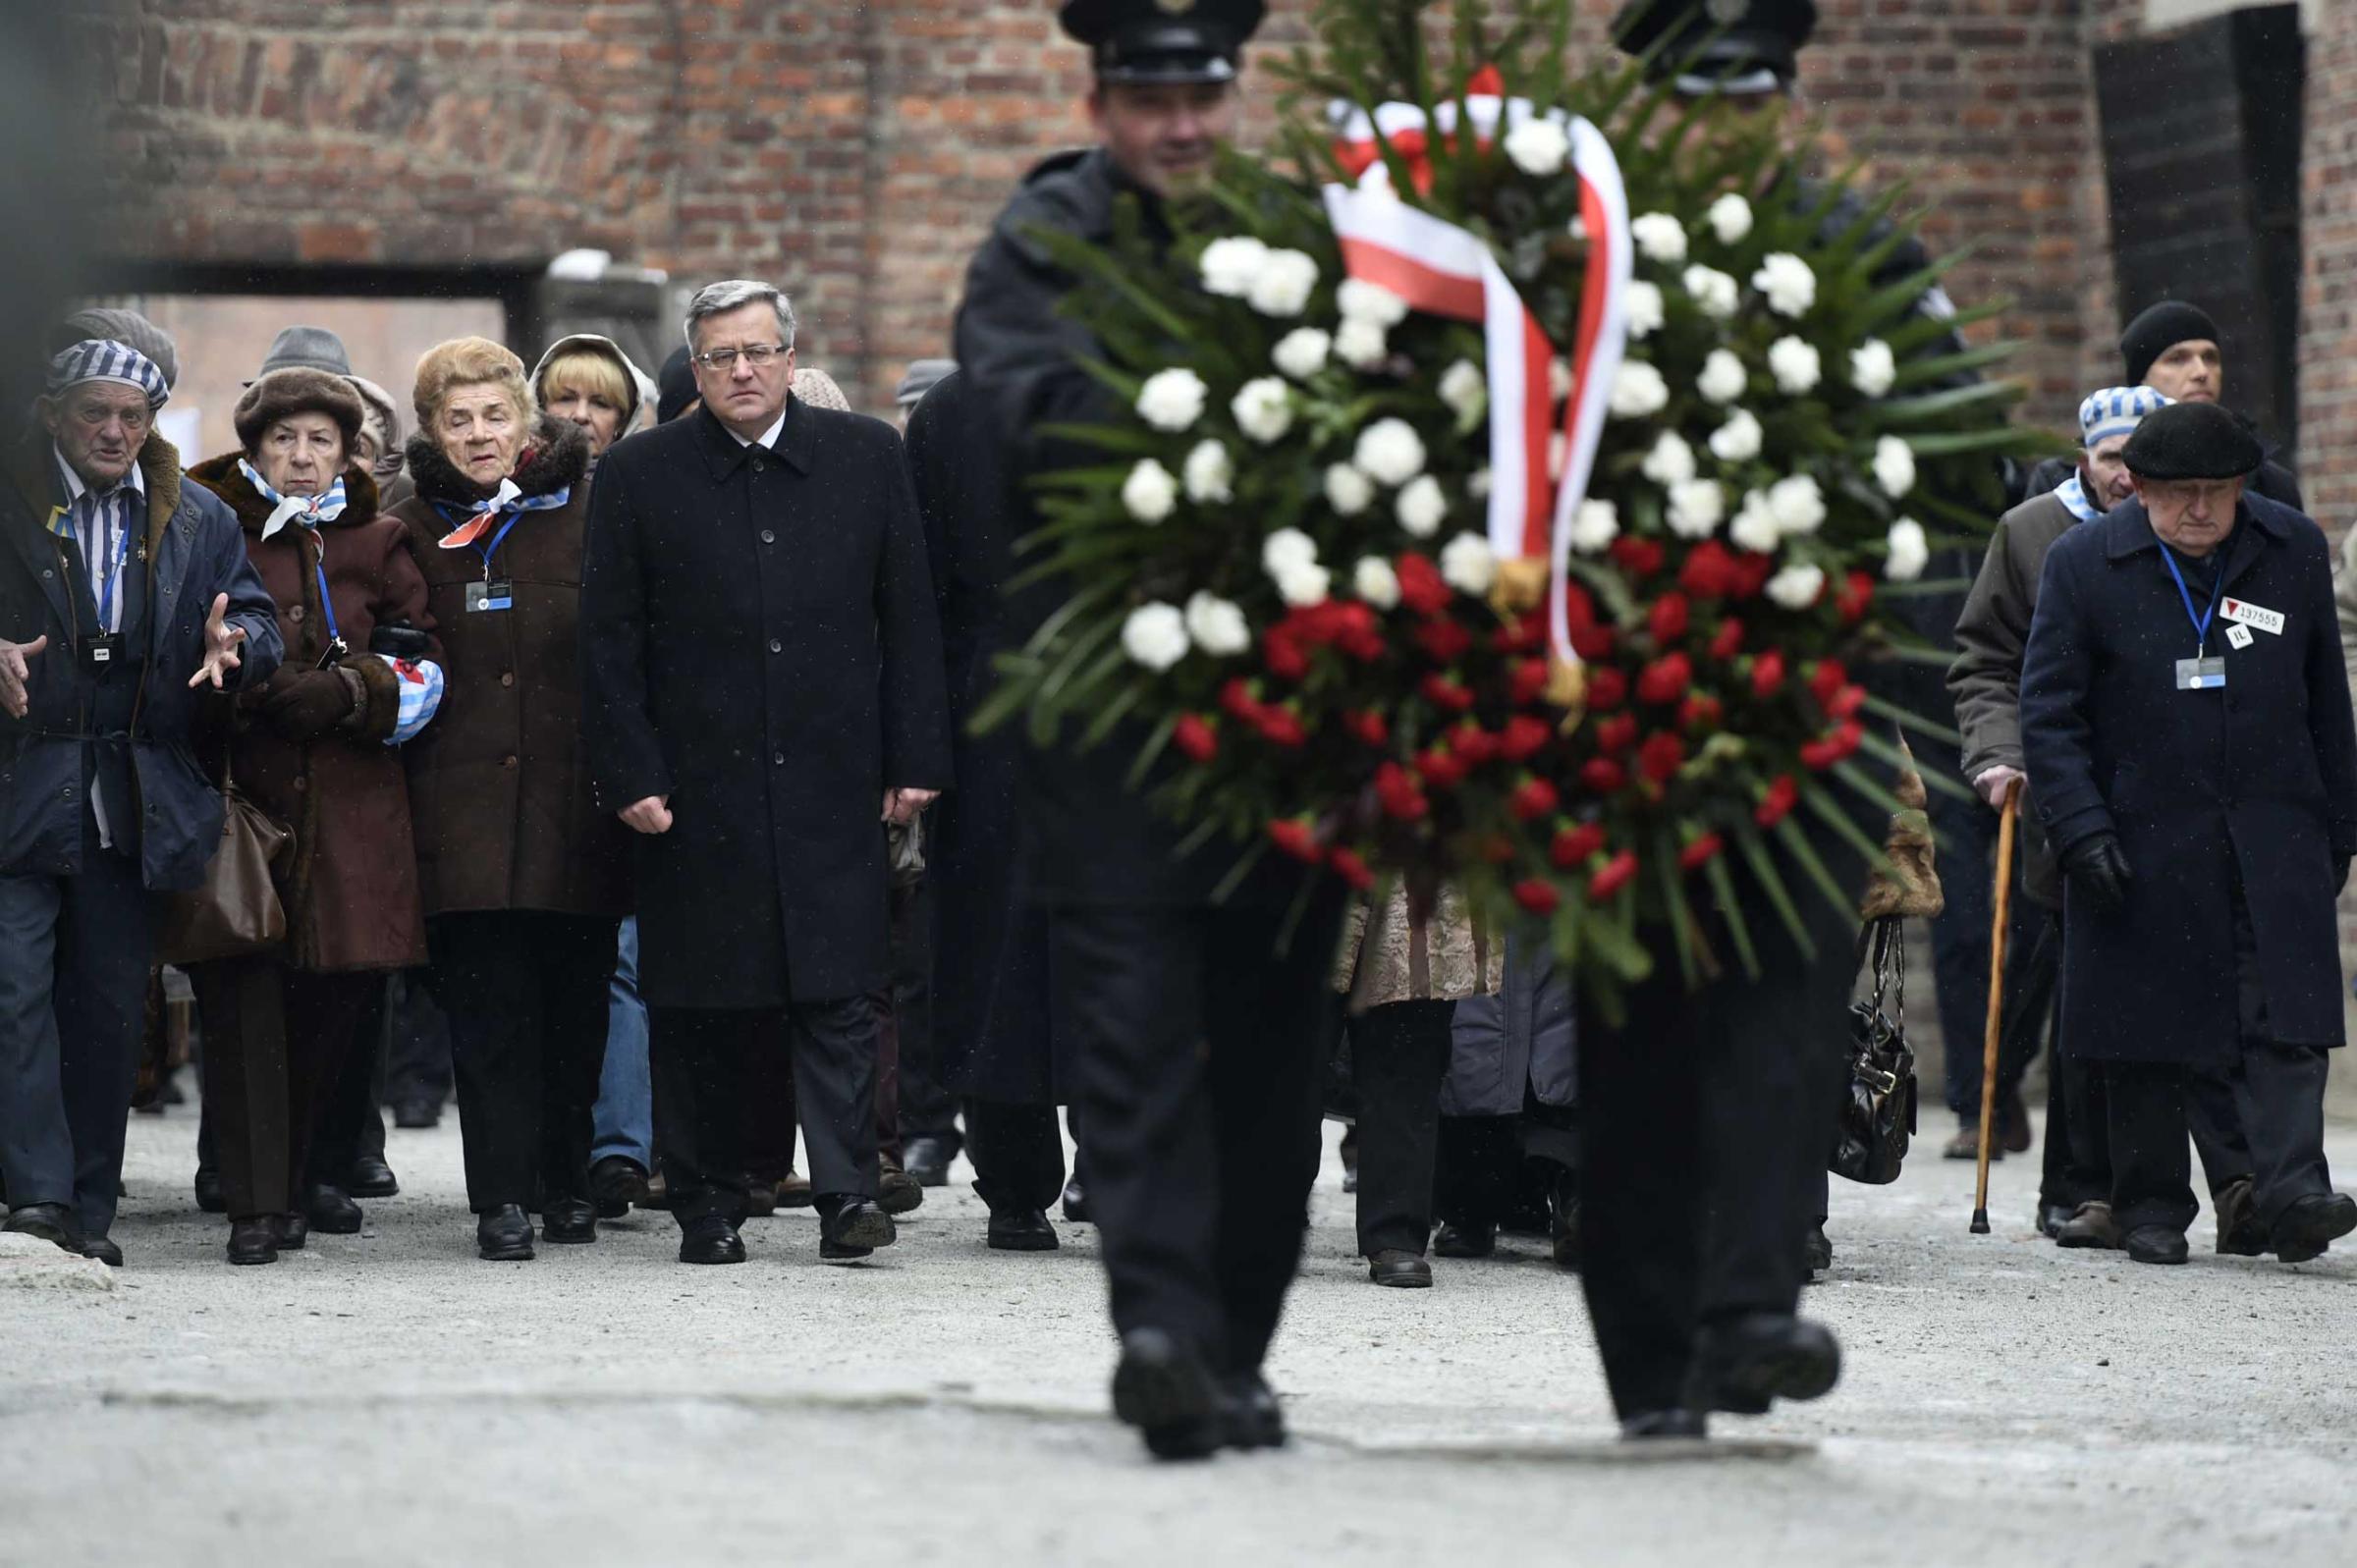 Polish President Bronislaw Komorowski and Auschwitz survivors lay down a wreath at the death wall of the former Auschwitz concentration camp on Jan. 27, 2015 at the Auschwitz-Birkenau memorial site in Oswiecim.